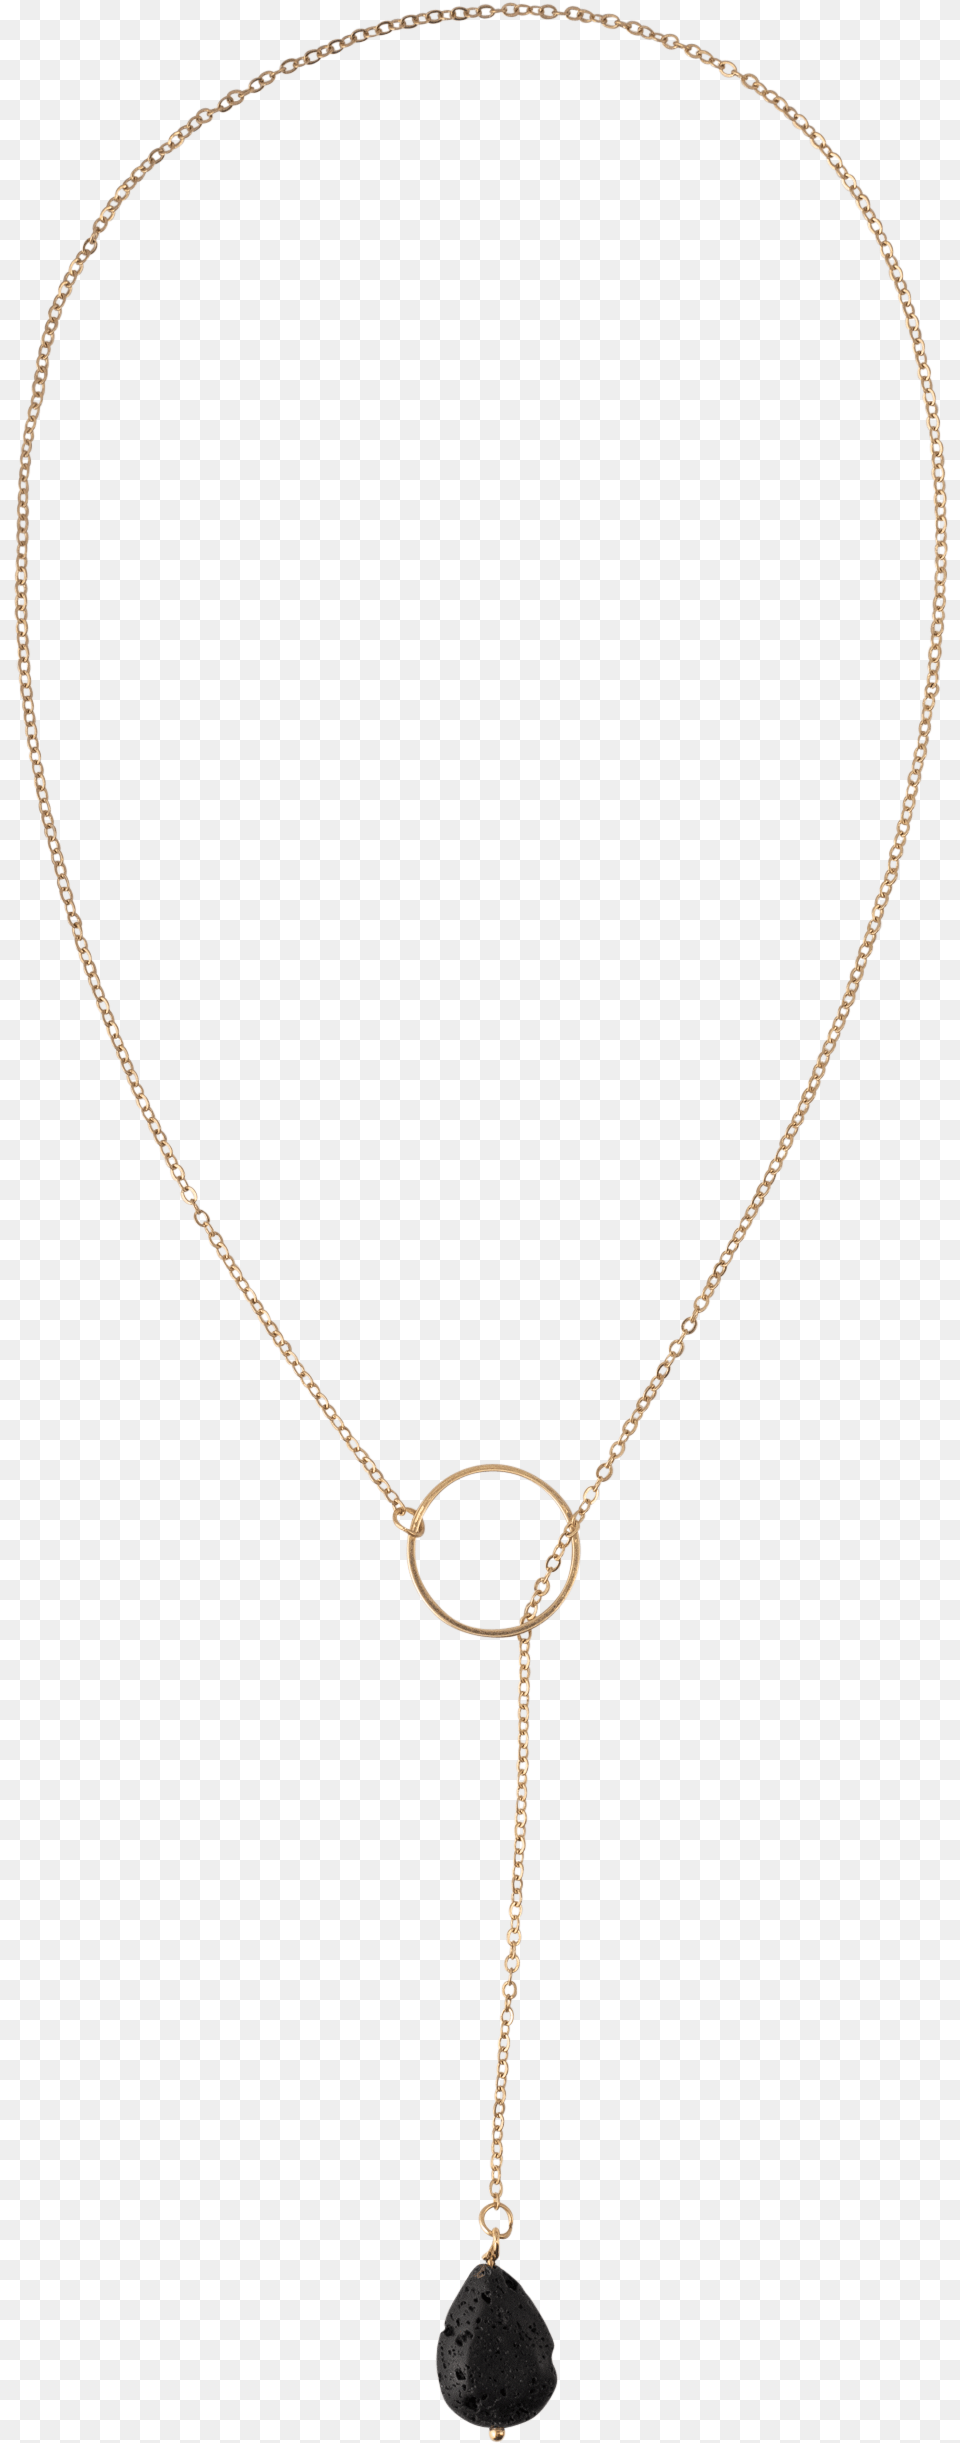 Gold Circle Lava Bead Lariat Necklace, Accessories, Jewelry, Pendant Free Transparent Png